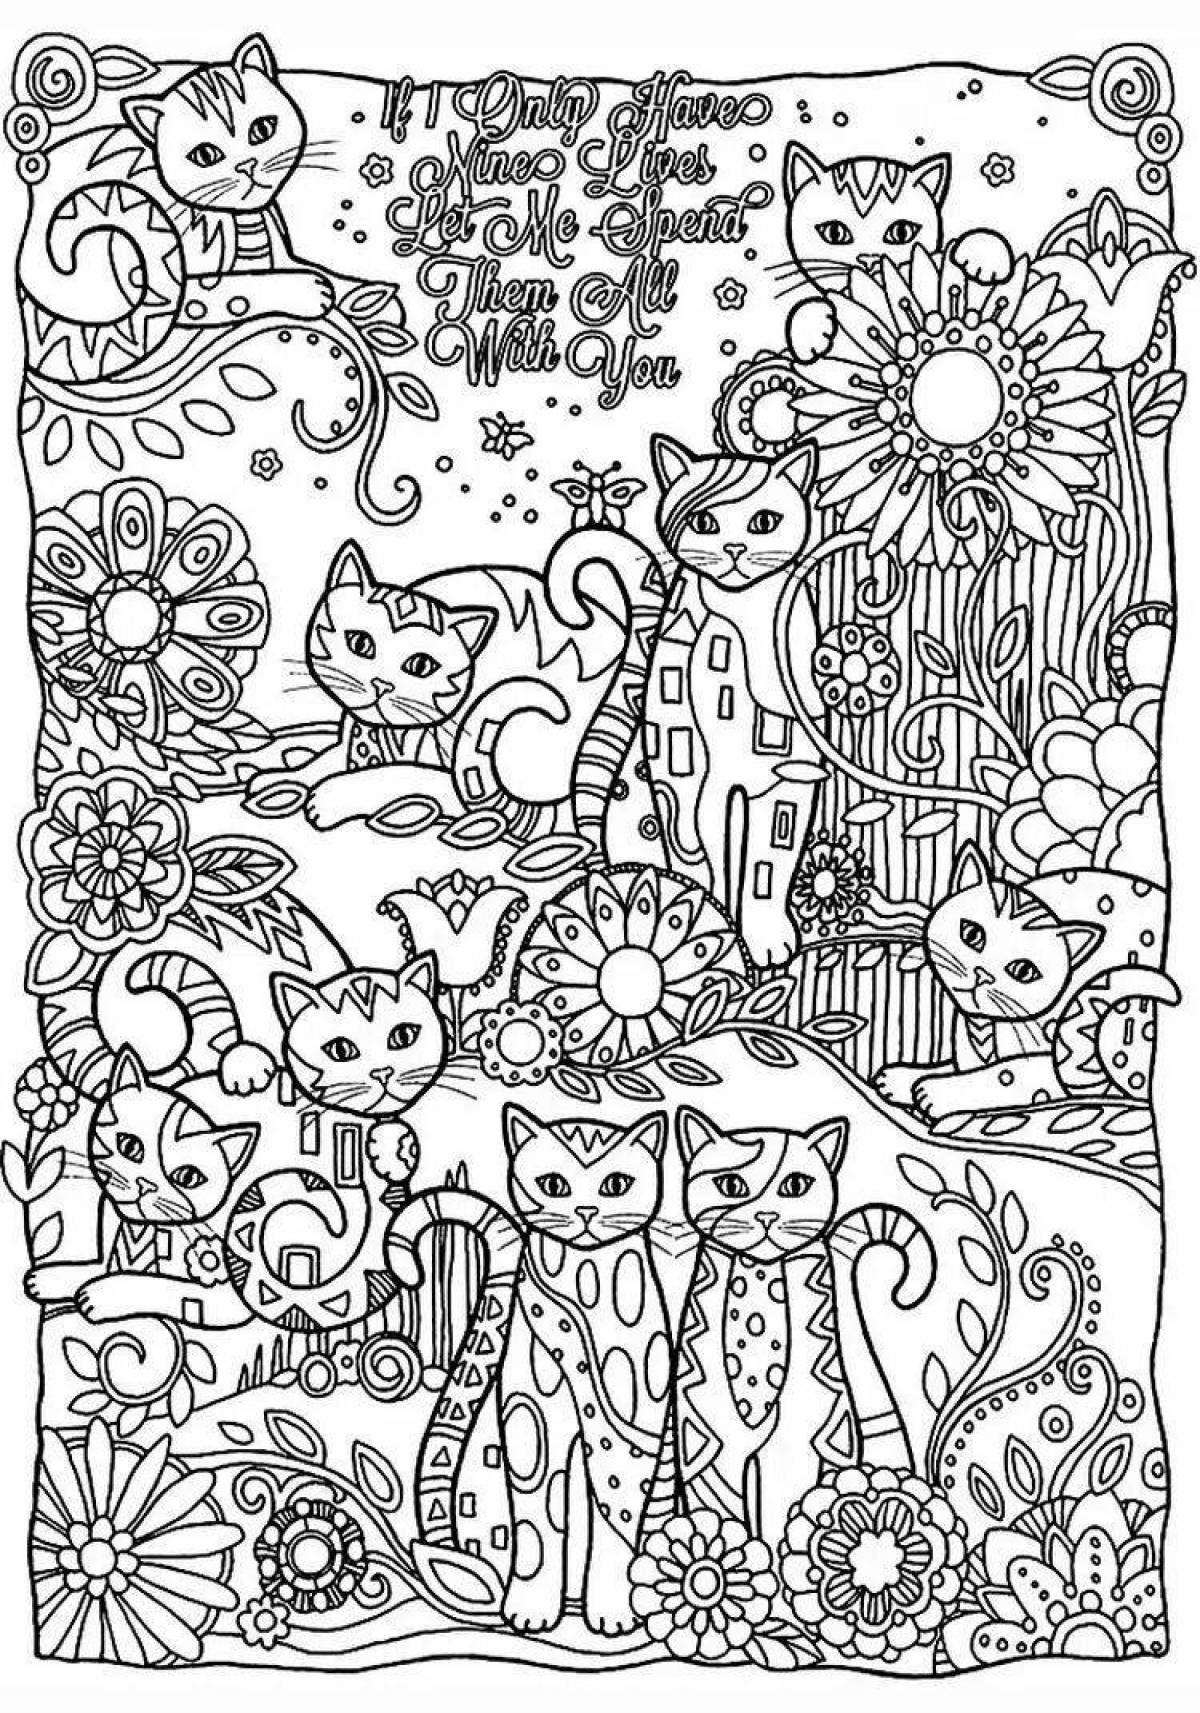 Happy coloring page small for girls